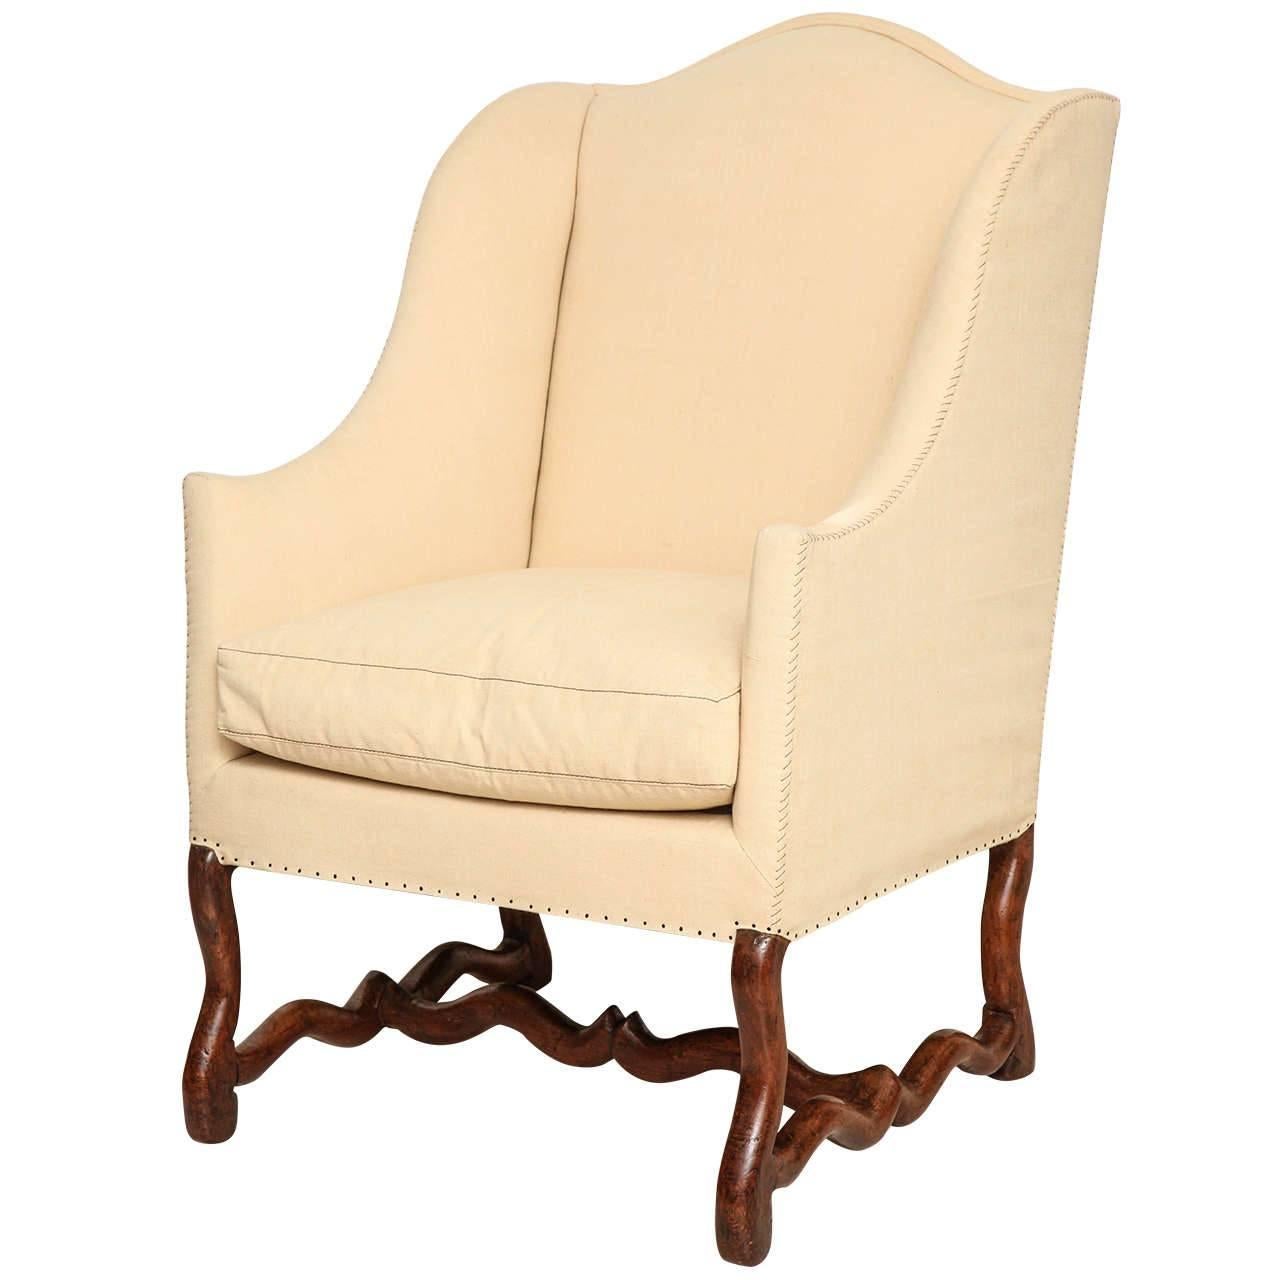 18th Century French "OS De Mouton" Upholstered Walnut Wing Chair